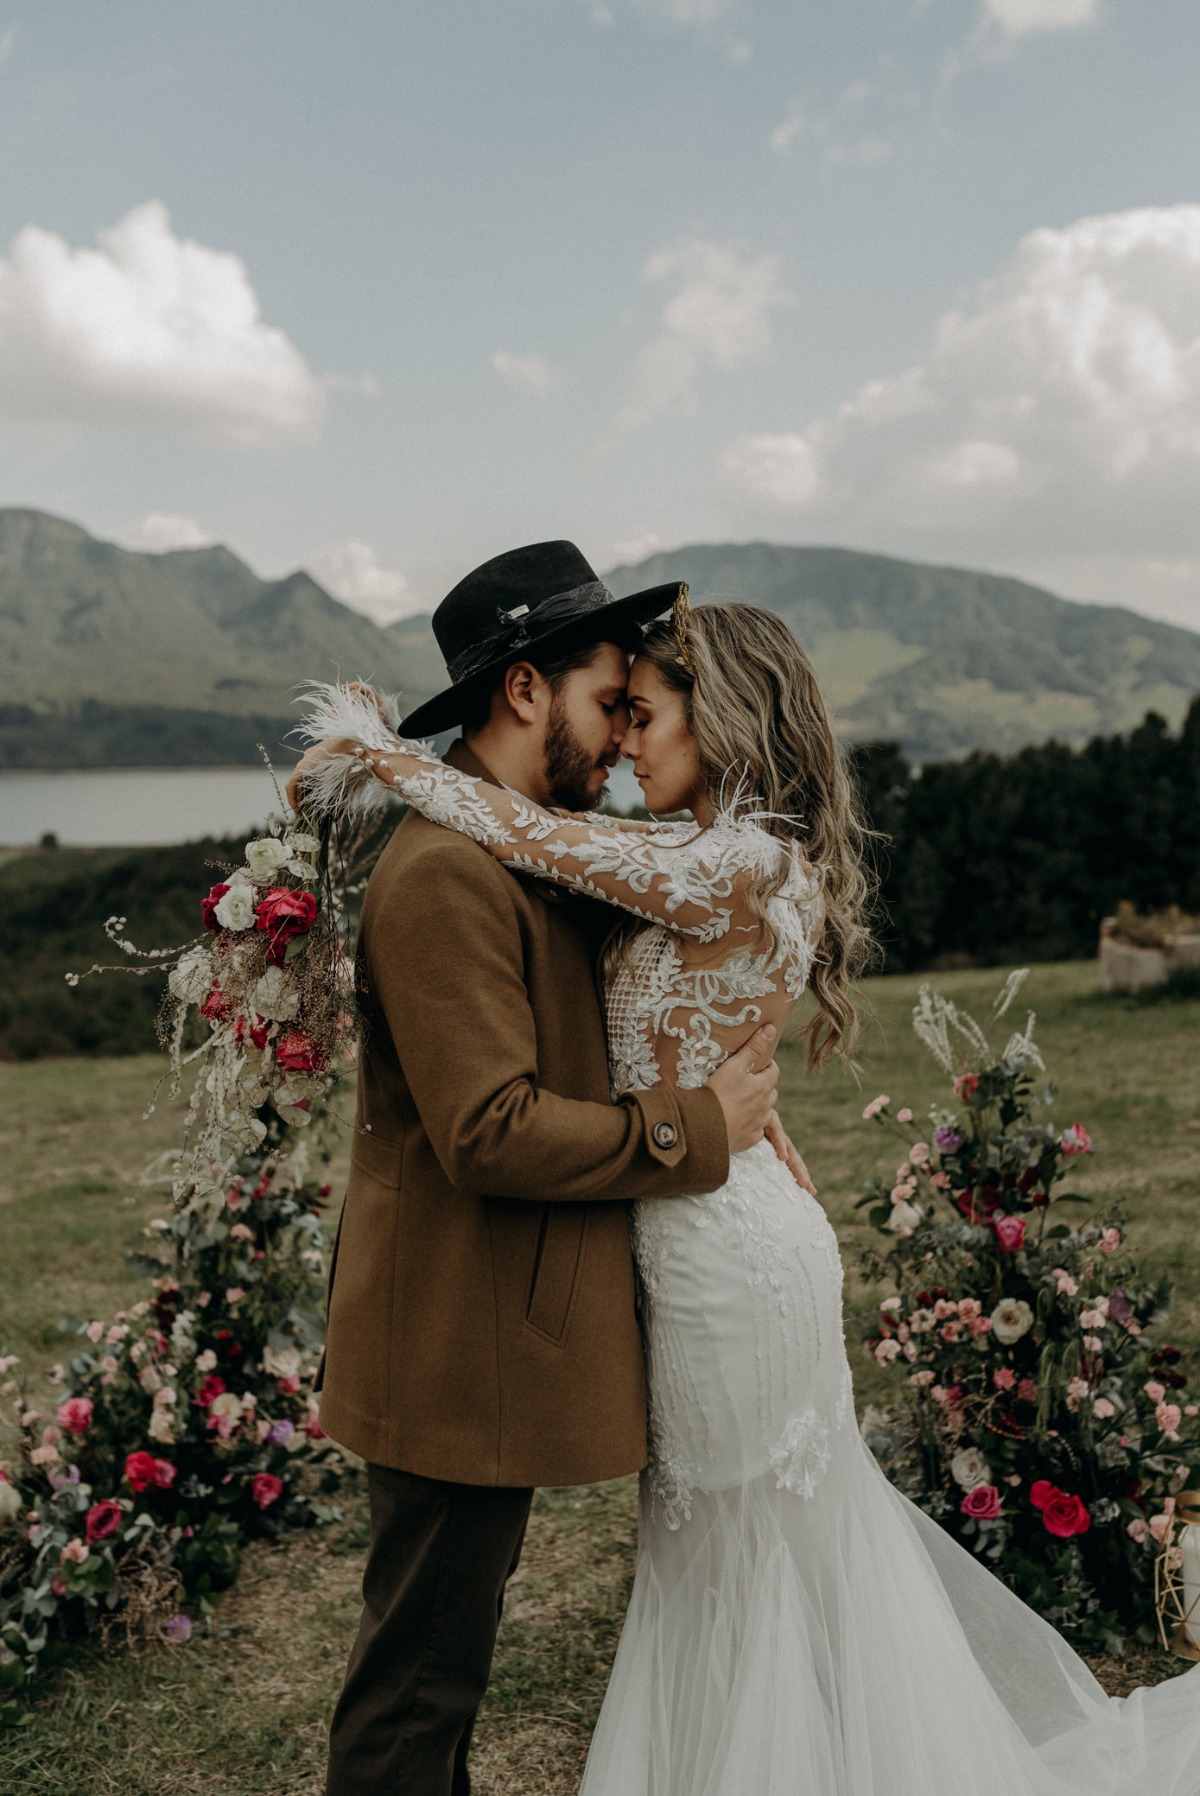 A Sustainable Glamping Elopement Inspiration in the Hills of Colombia